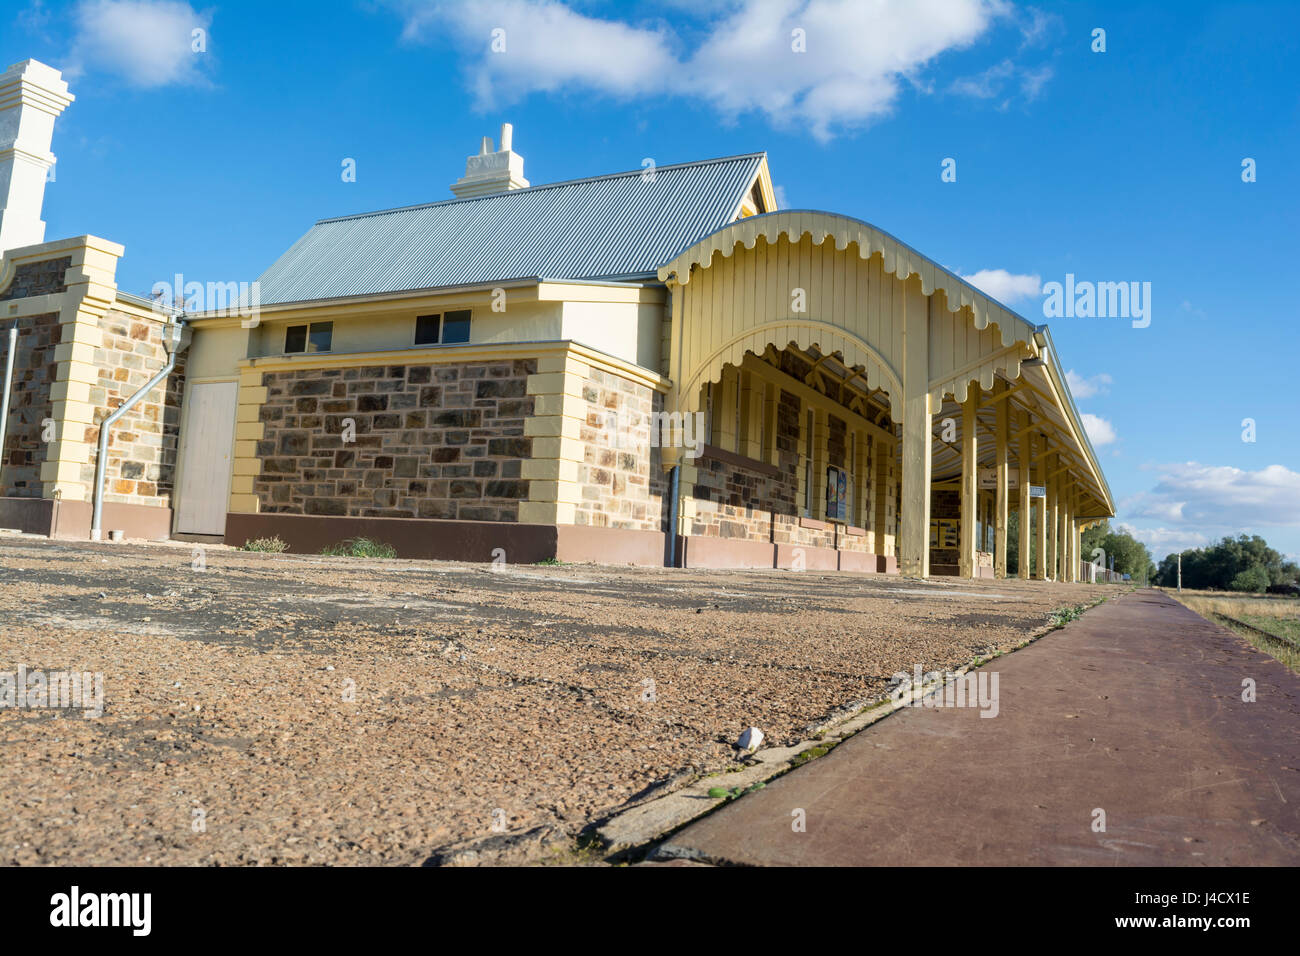 Burra Railway Station, Burra, South Australia, Australia - June 4 2016: The historic restored Burra Railway Station seen from the side. Stock Photo